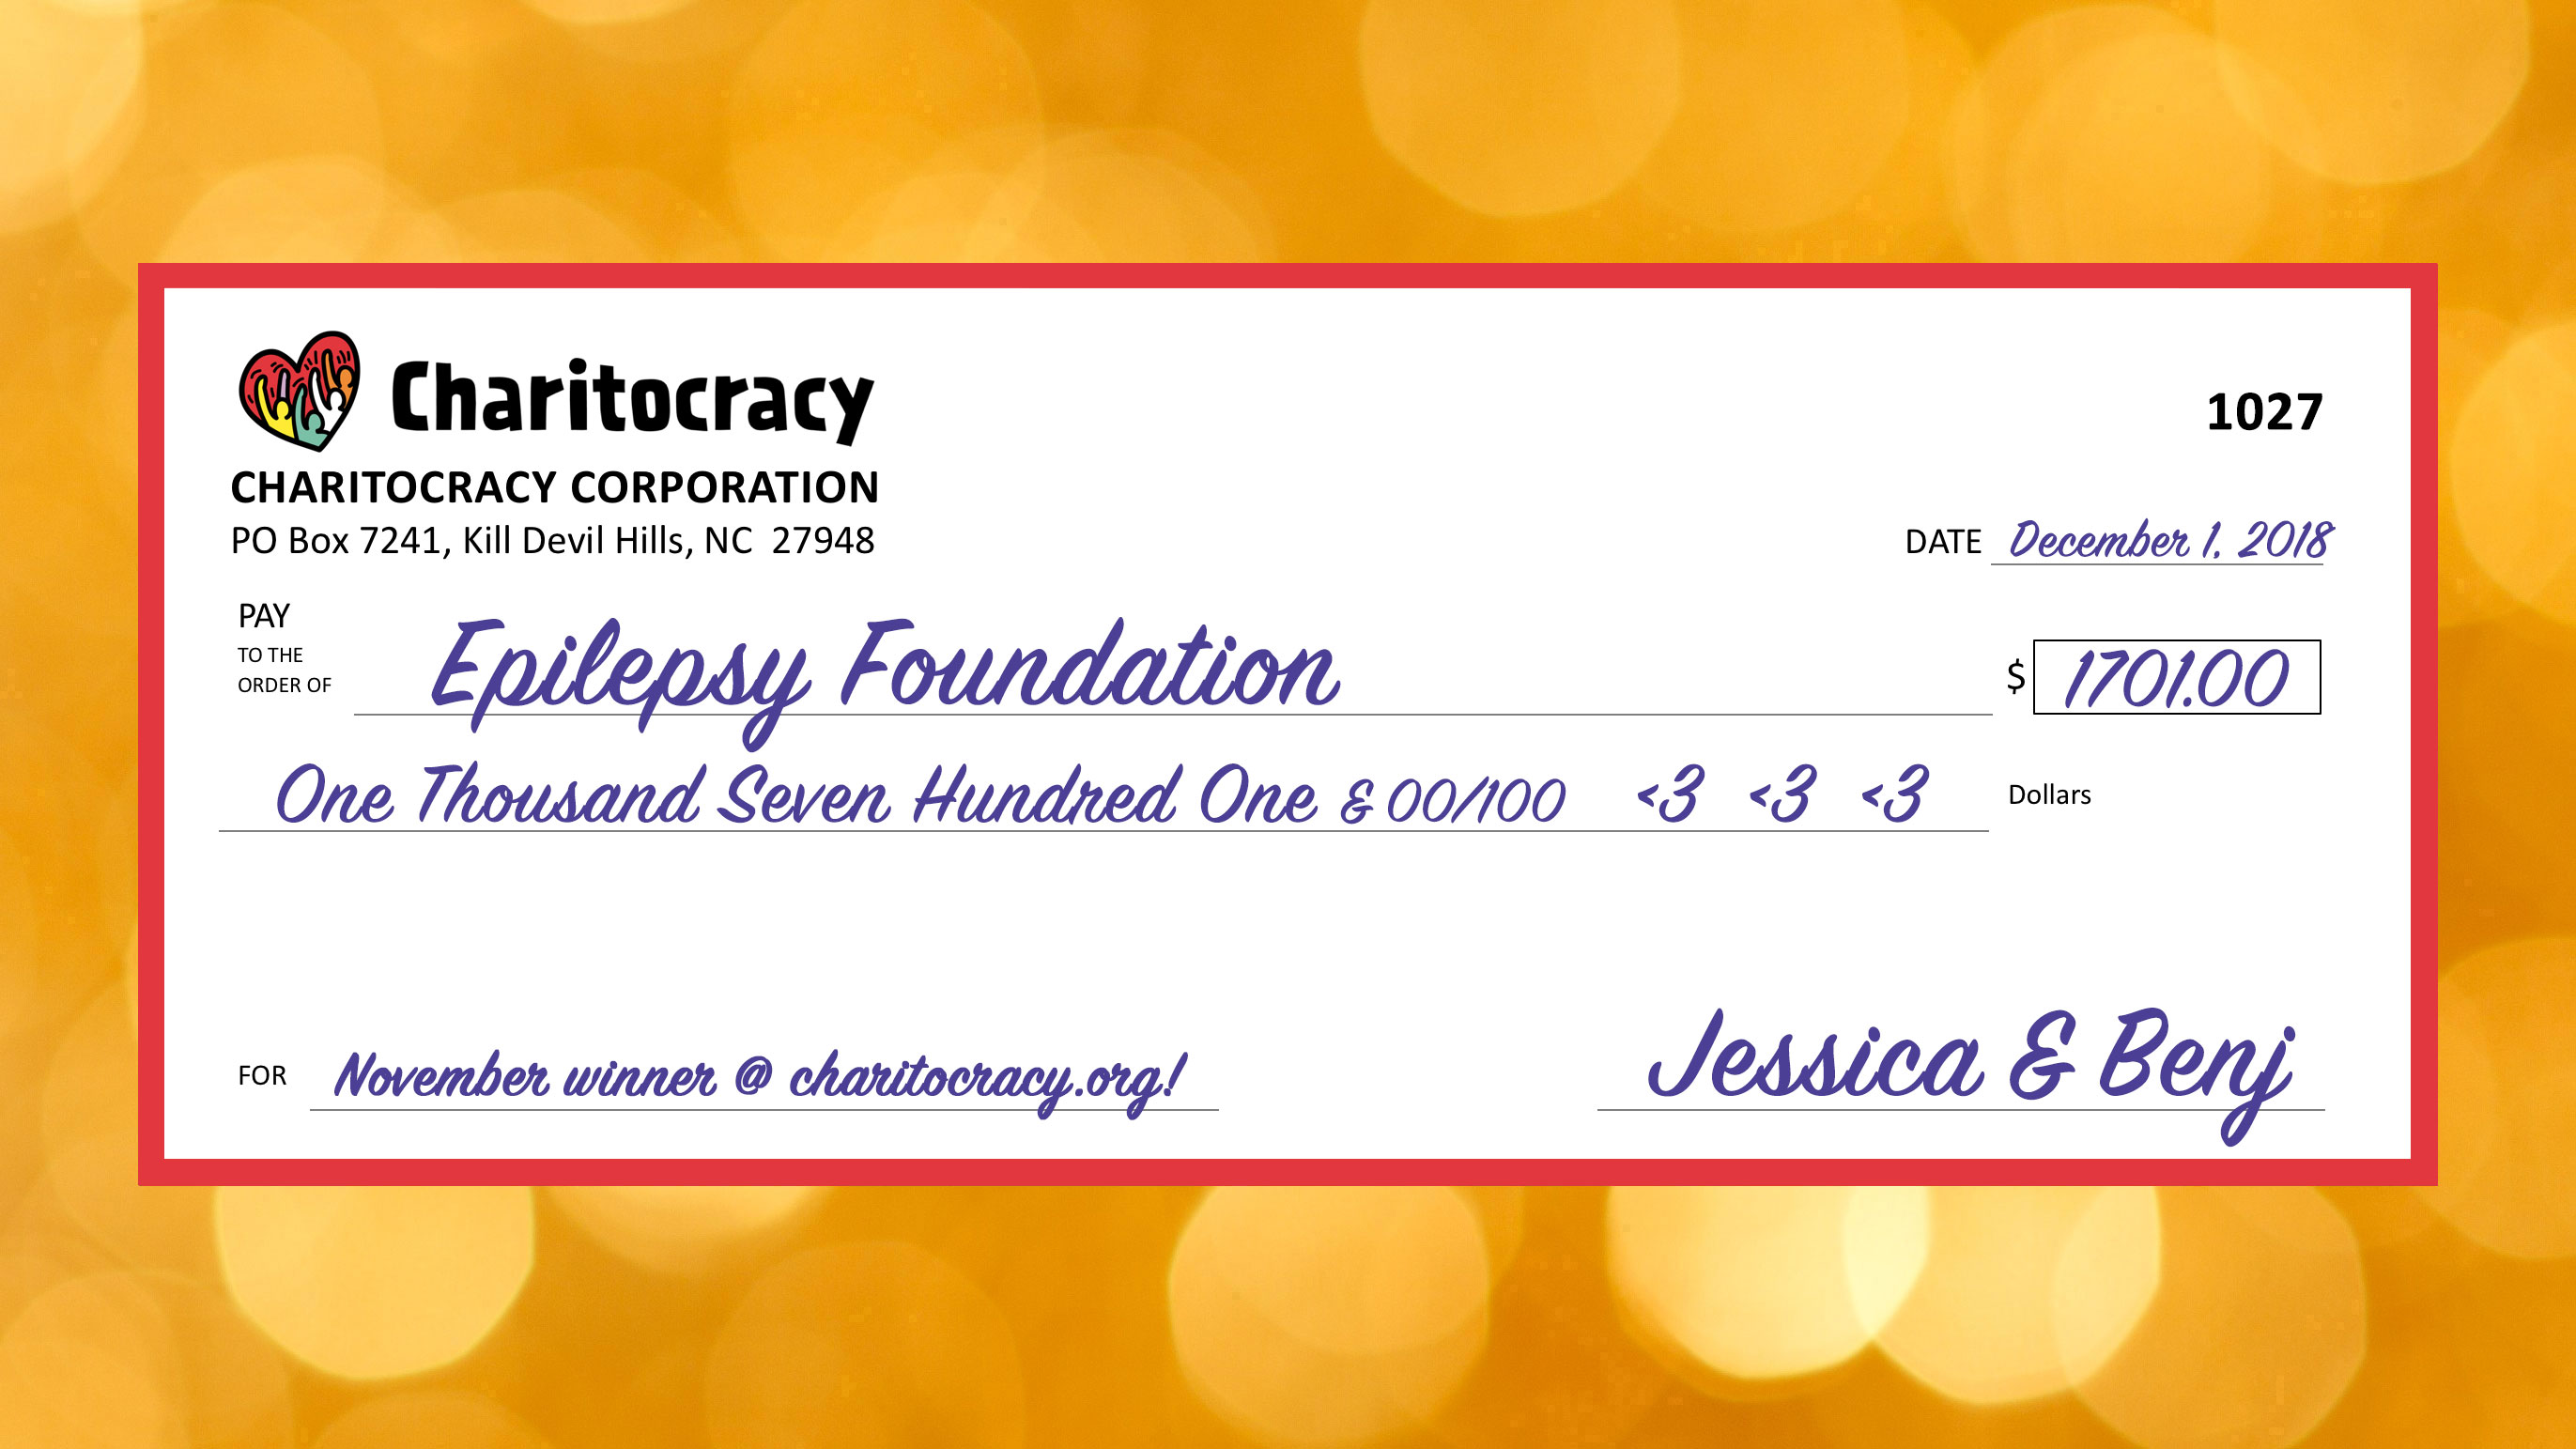 Charitocracy's 27th check to November winner Epilepsy Foundation for $1701